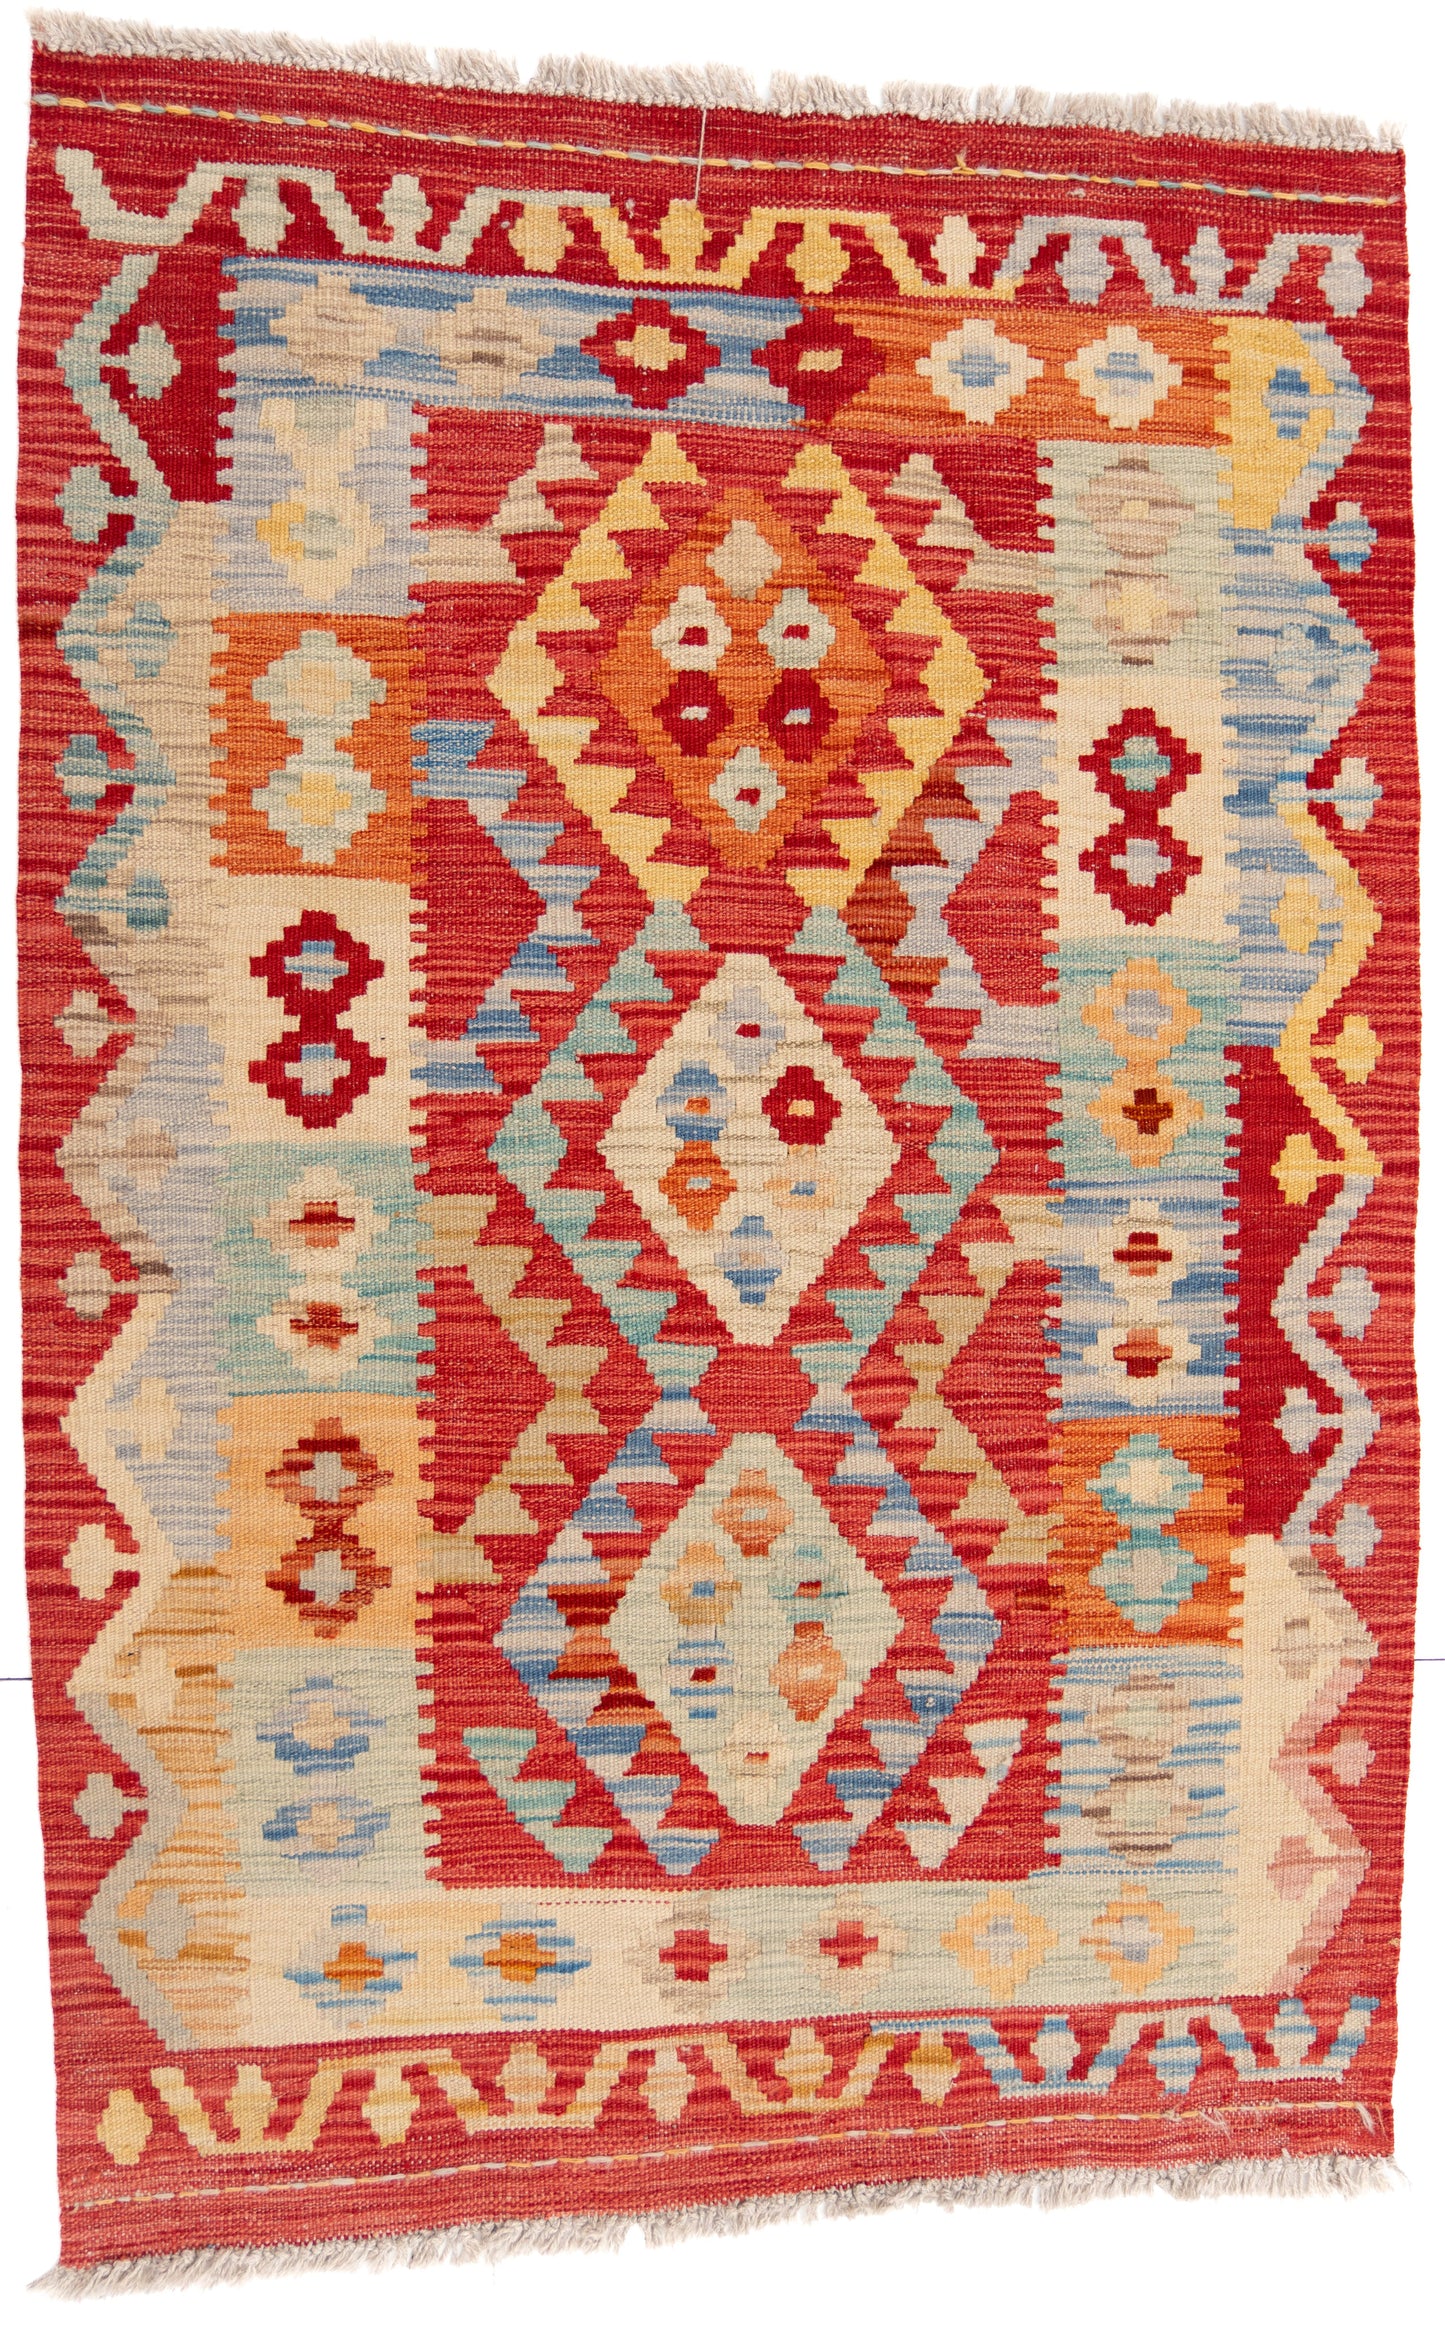 Multicoloured Red Kilim Carpet with Bright Geometric Shapes